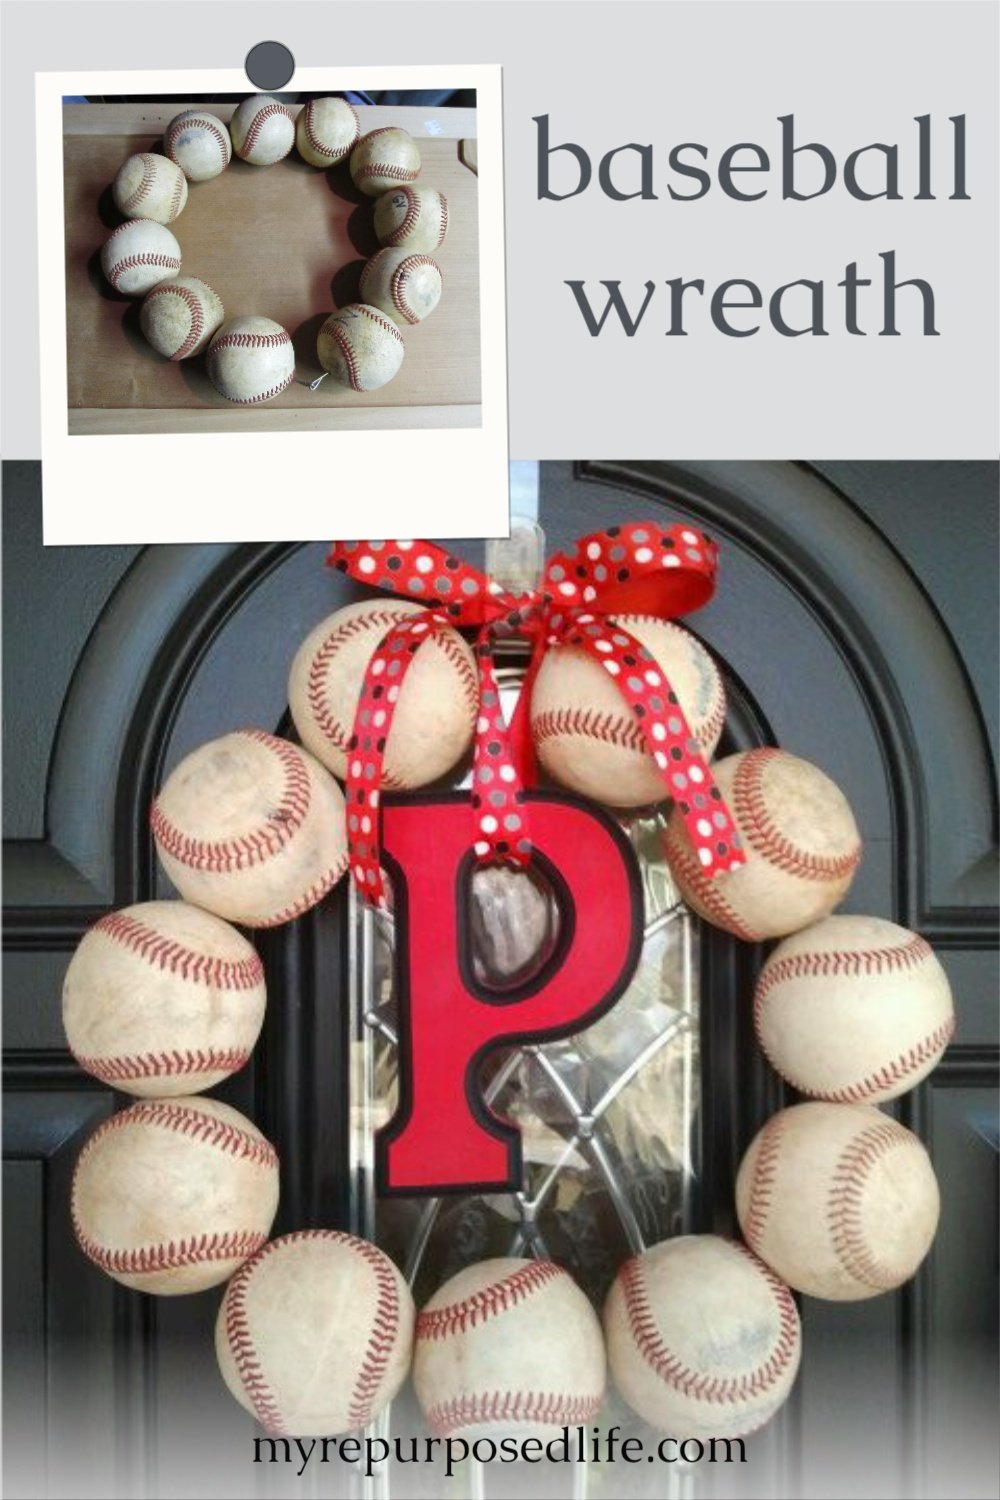 How to make a repurposed baseball wreath out of those special balls you've been saving. Perfect for the baseball fan's front door. #MyRepurposedLife #repurposed #baseball #wreath #playball via @repurposedlife